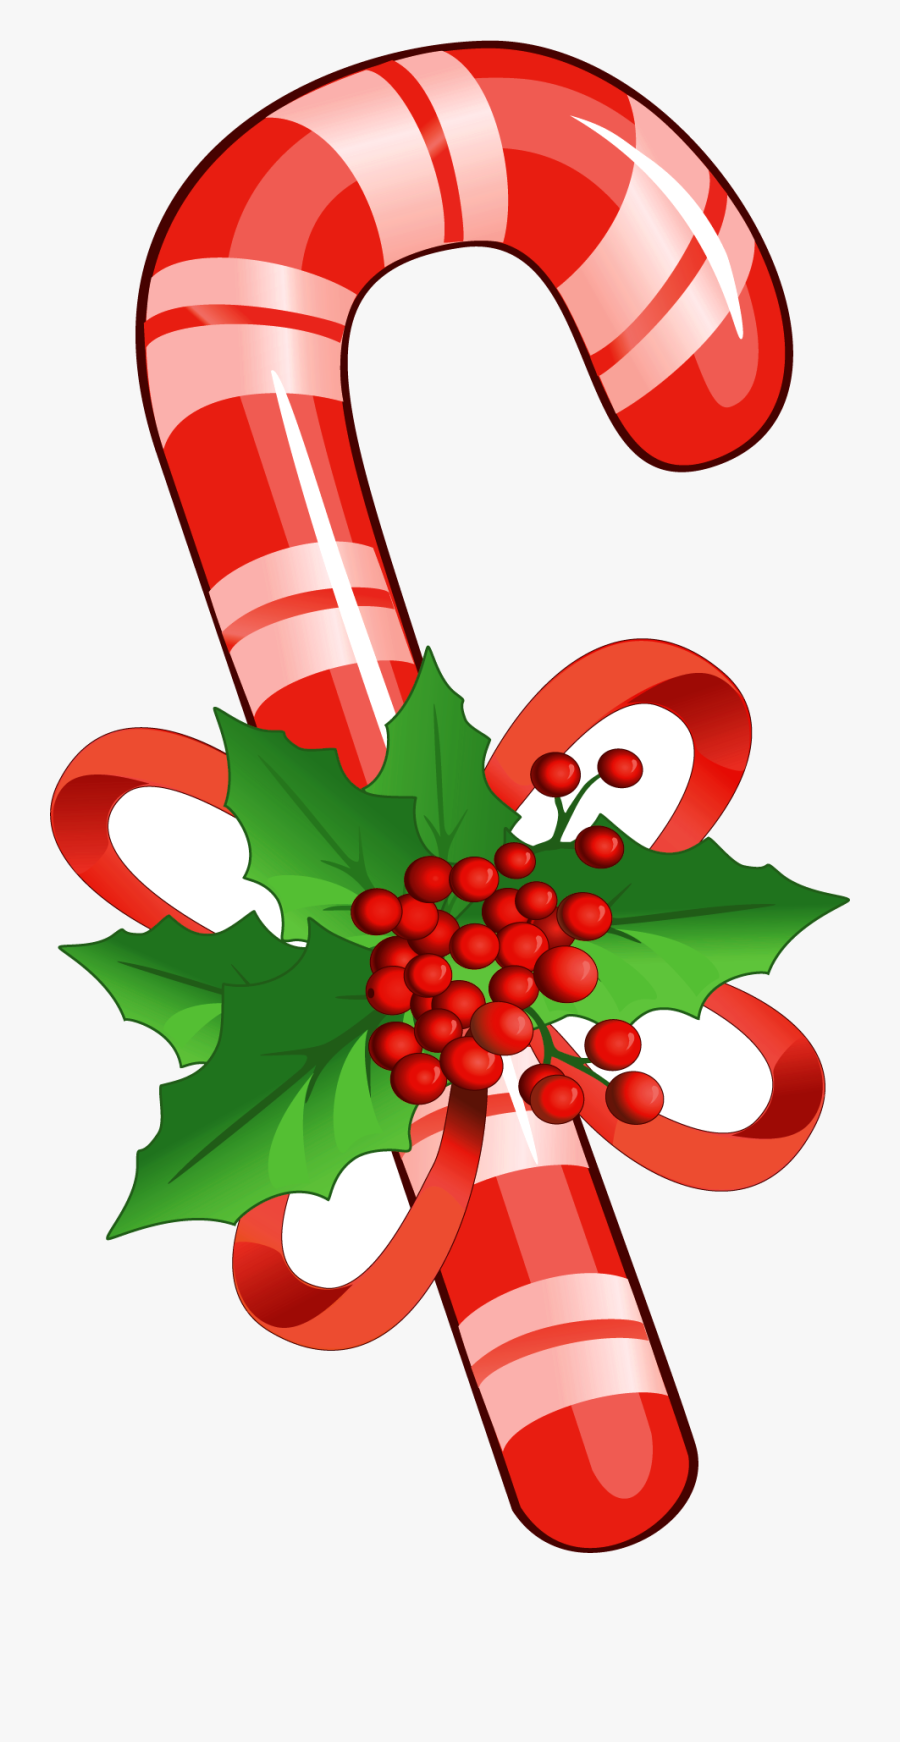 Candy Cane Peppermint Clipart Free On Ijcnlp Cliparts - Christmas Candy Cane Clipart, Transparent Clipart